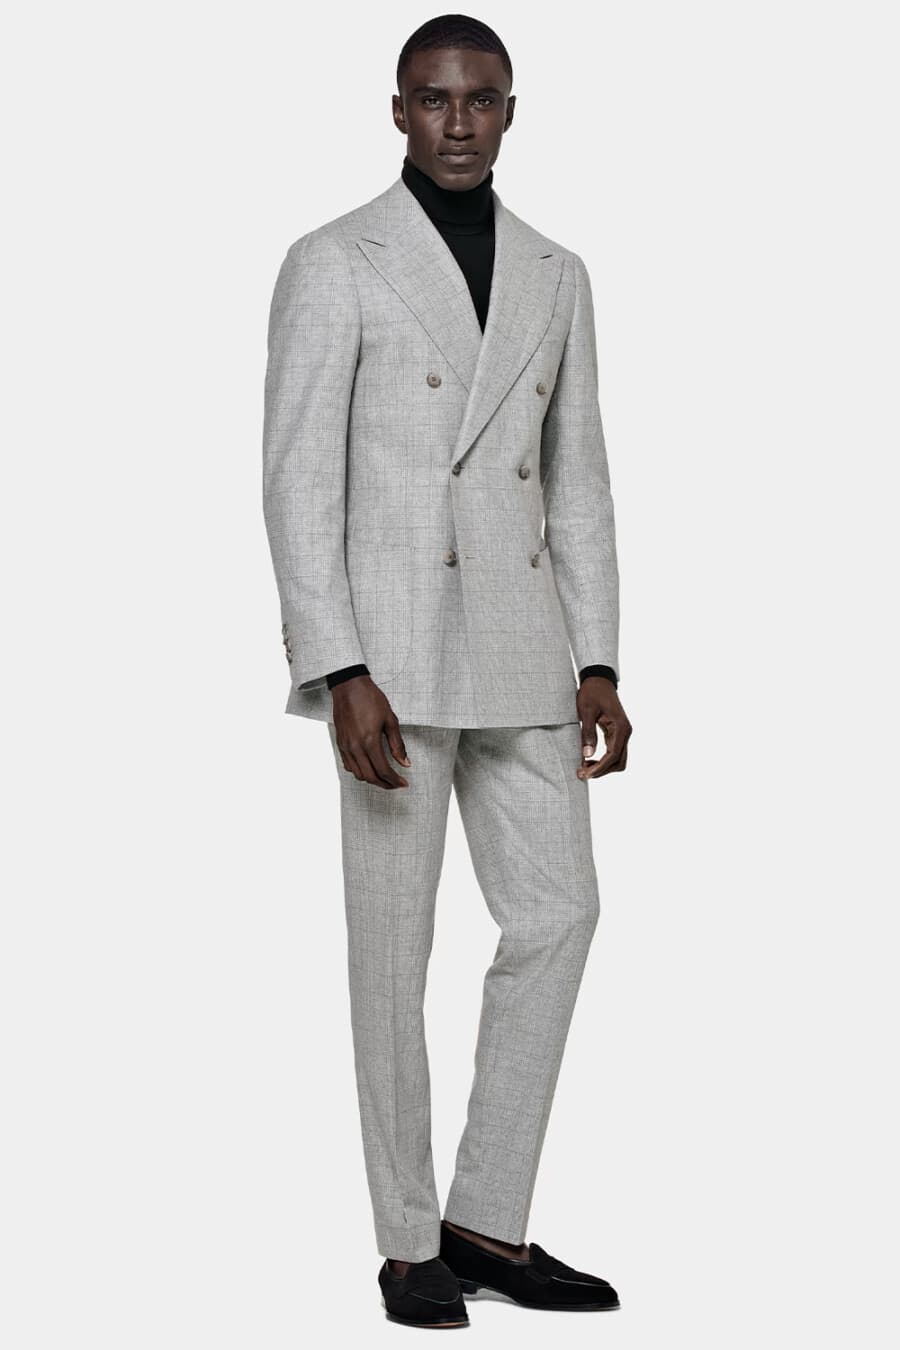 Men's light grey check double-breasted suit, black turtleneck and black suede Belgian loafers outfit